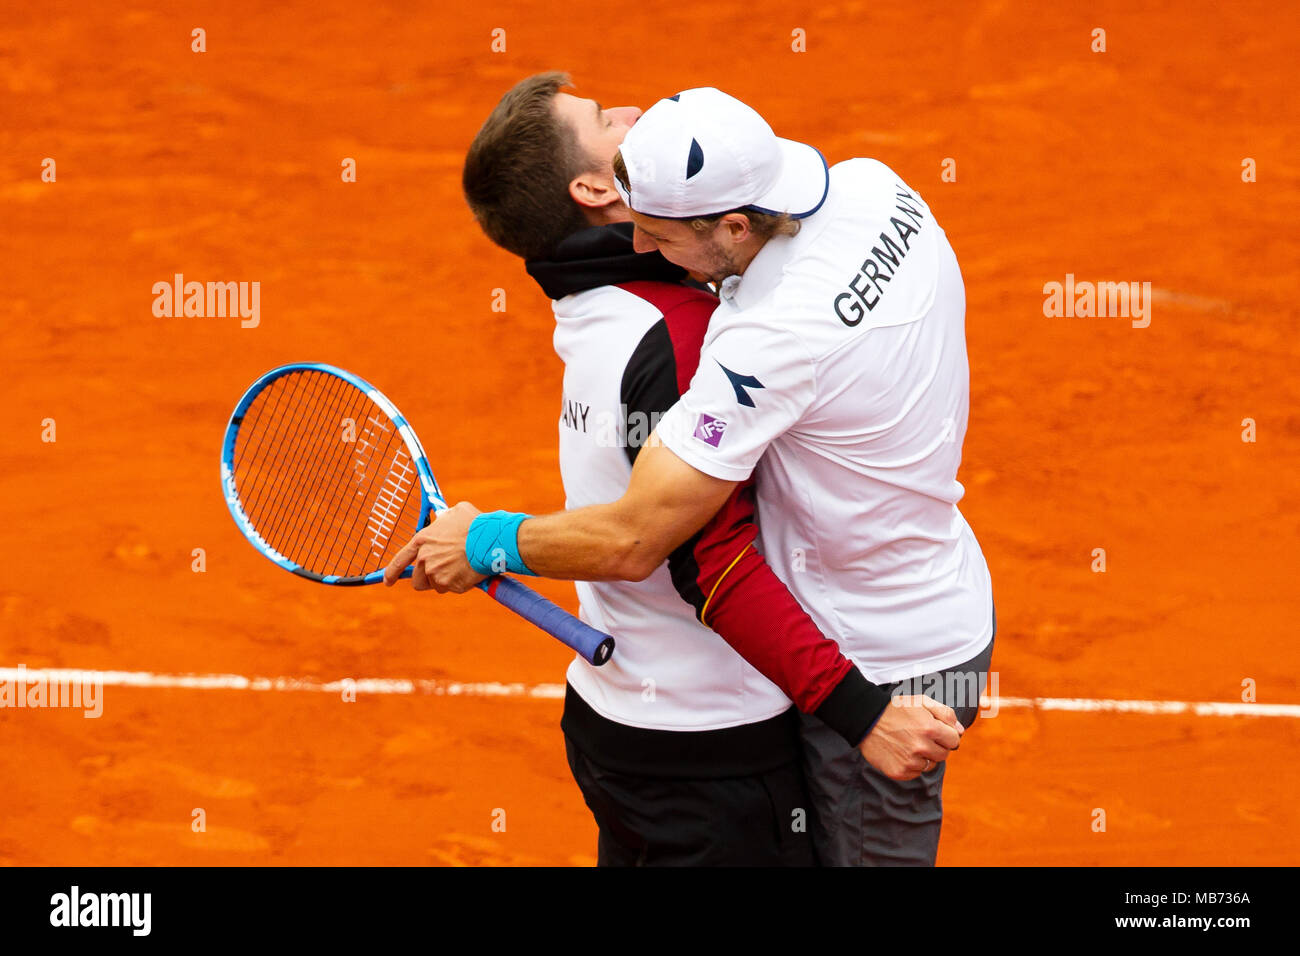 Valencia, Spain. 7th April, 2018. German tennis player Jan-Lennard Struff cheer with team captain Michael Kohlmann thanks to a 5-set doubles victory against Feliciano Lopez and Marc Lopez at the Valencia Bullring. Credit: Frank Molter/Alamy Live News Stock Photo